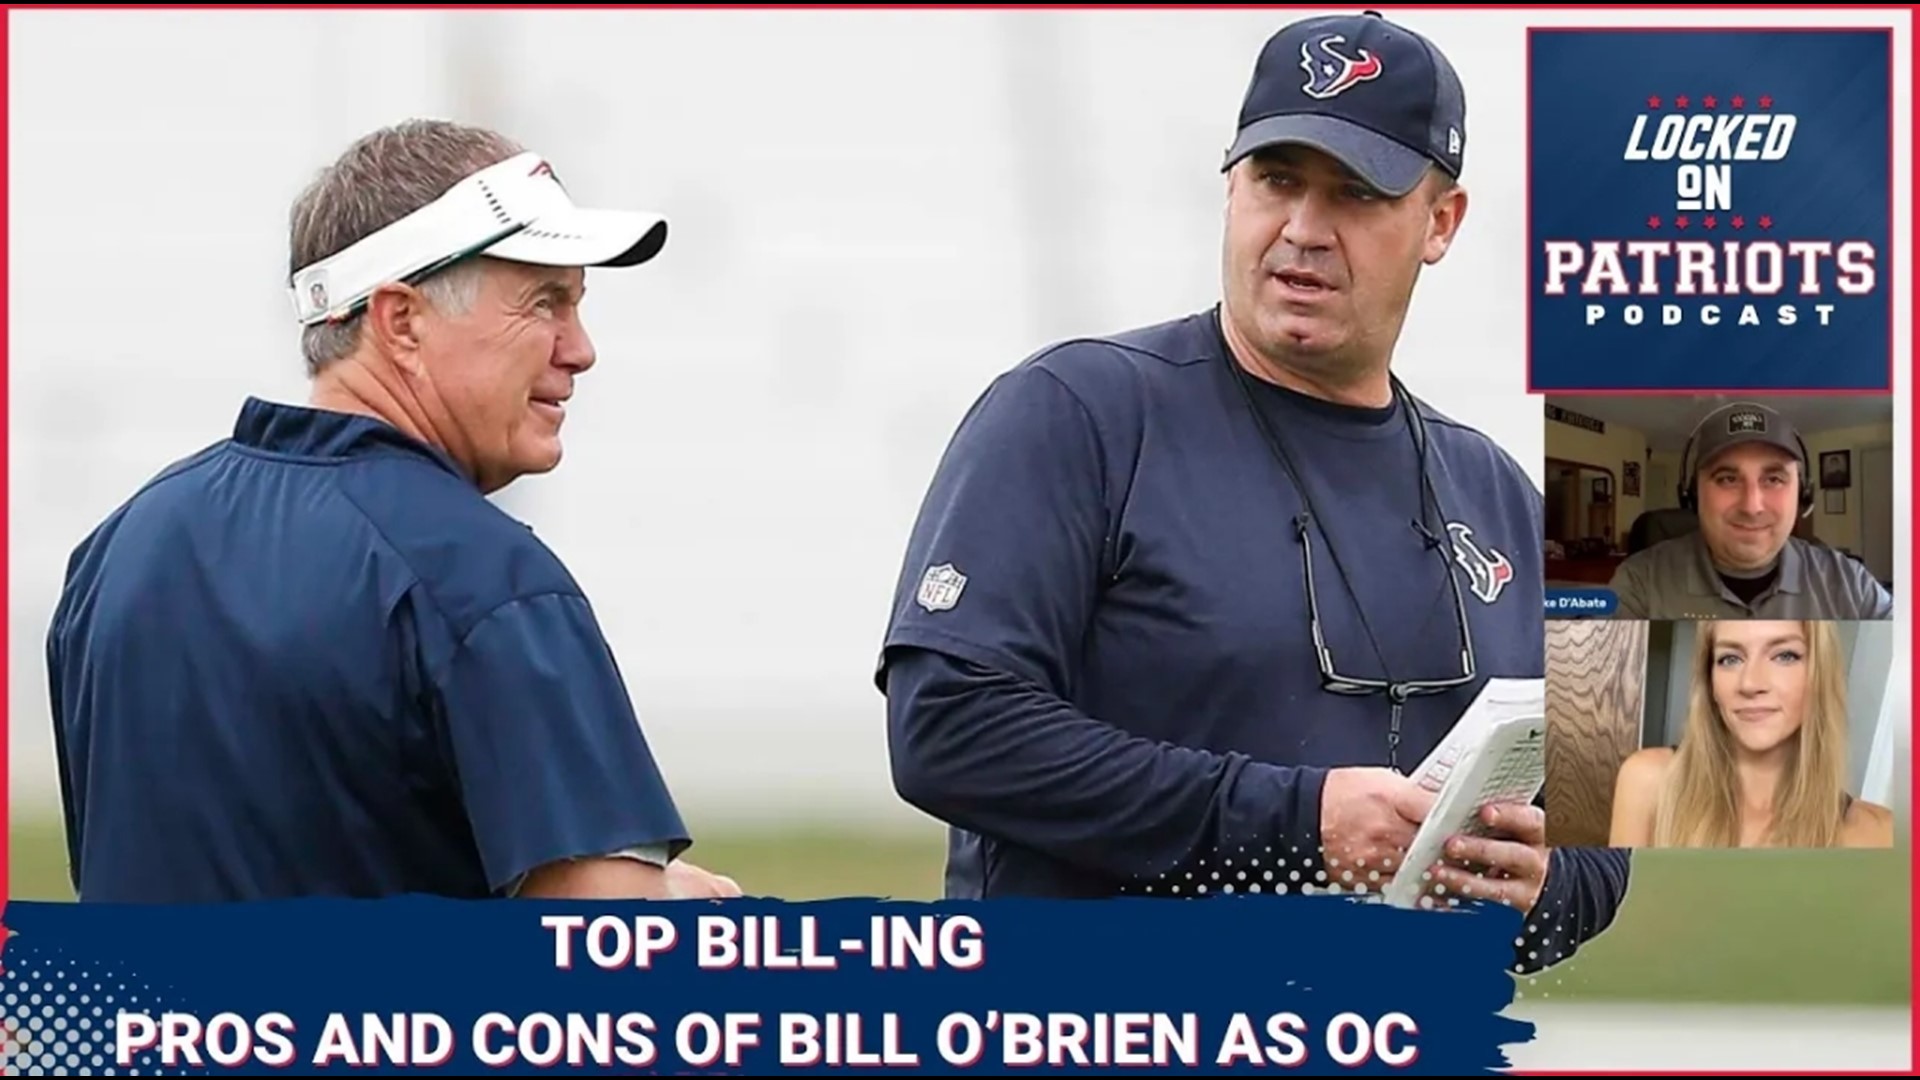 By most accounts, Alabama offensive coordinator Bill O’Brien remains a ‘top candidate’ for the open OC job with the New England Patriots.